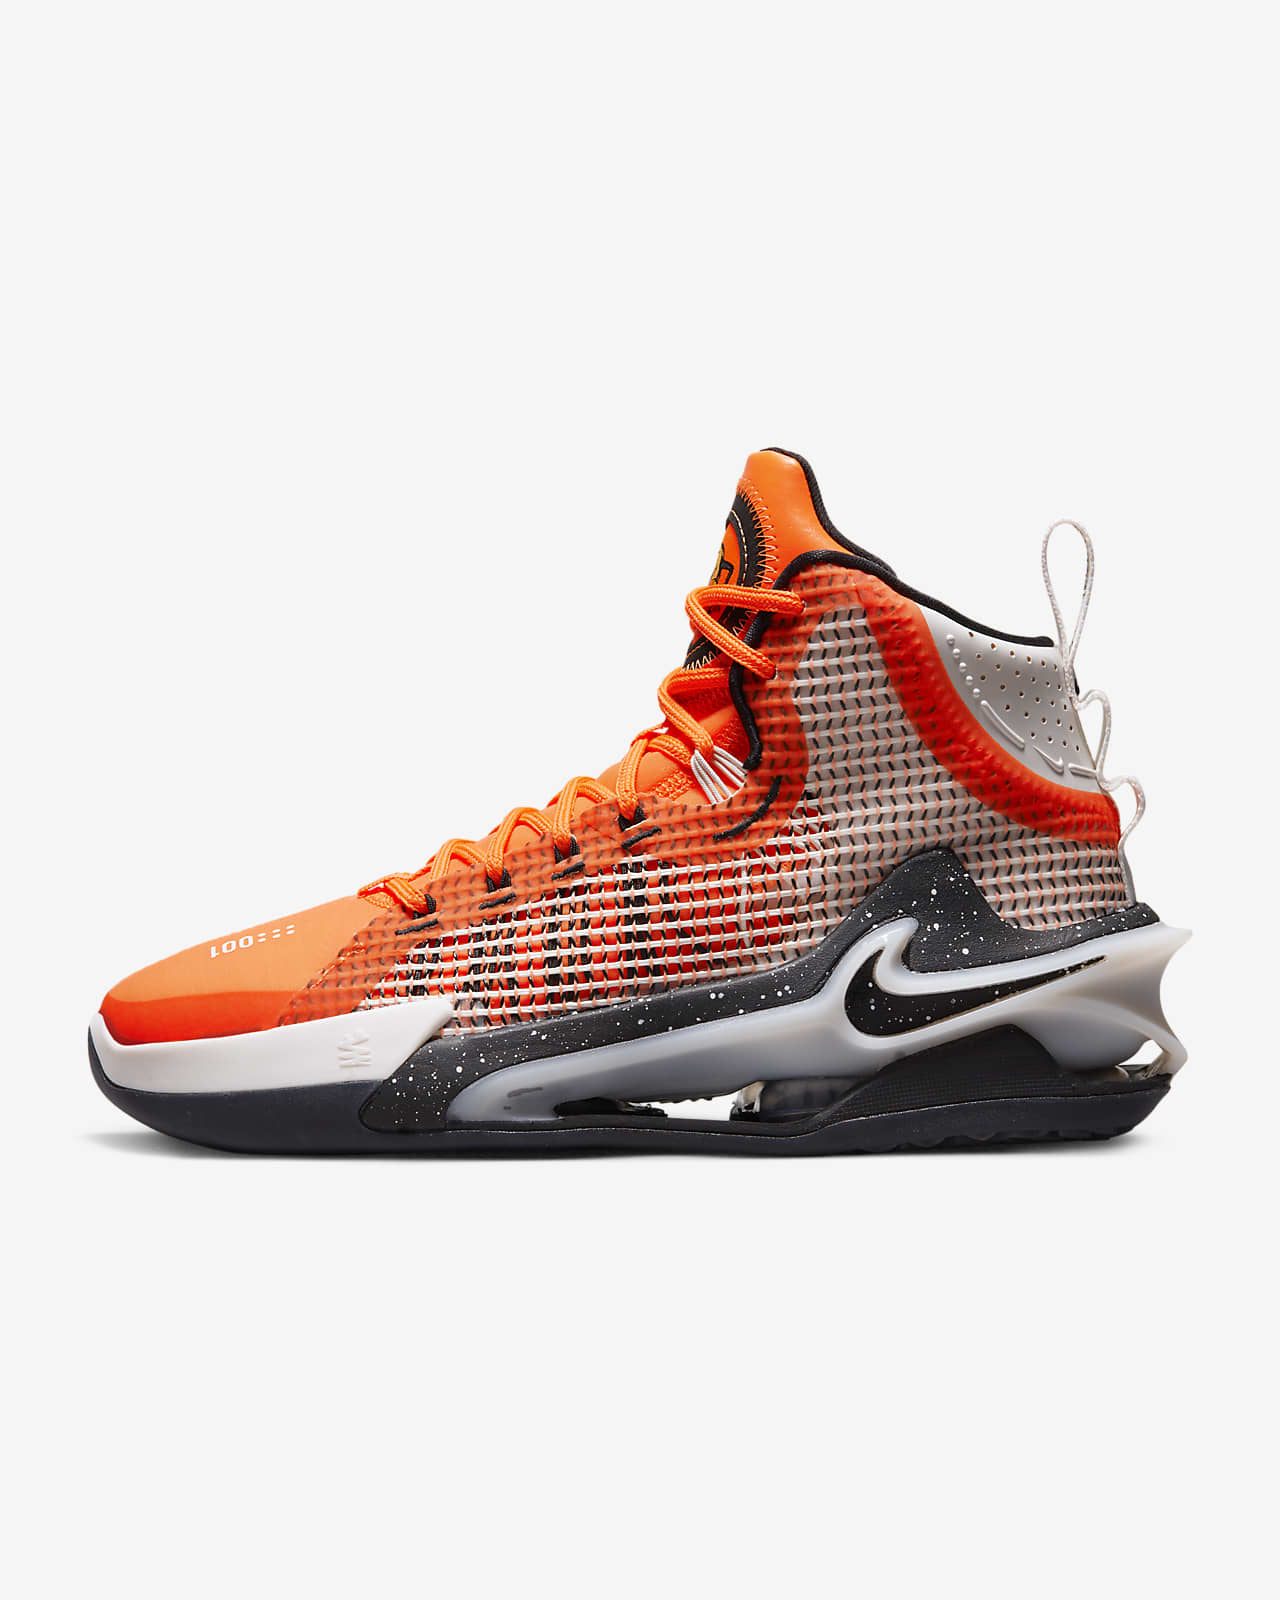 Nike Zoom G.T. Jump Basketball Shoes.